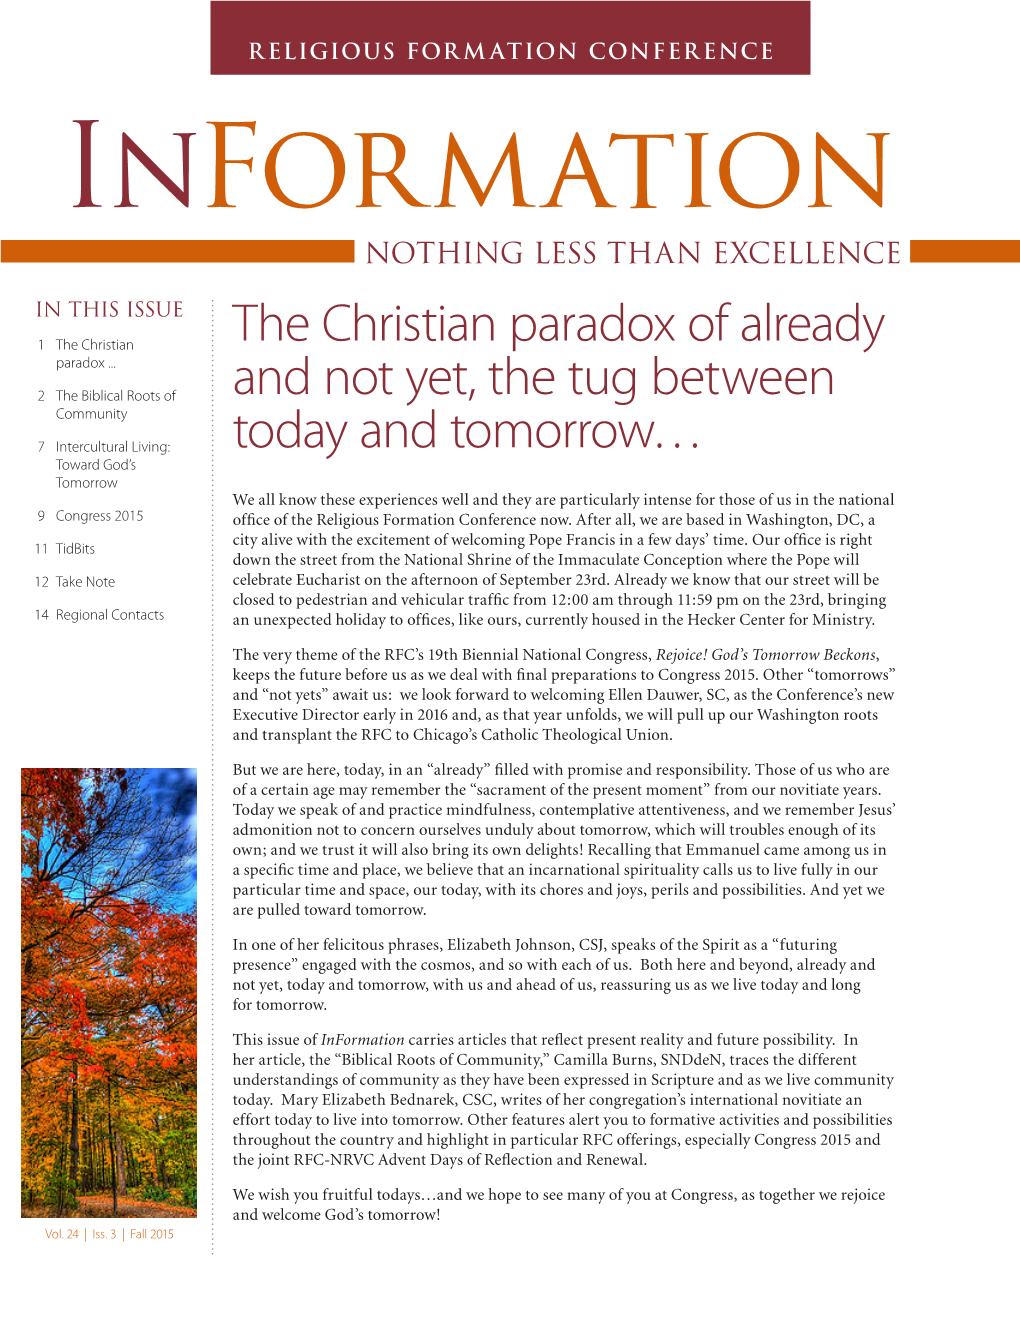 The Christian Paradox of Already and Not Yet, the Tug Between Today And